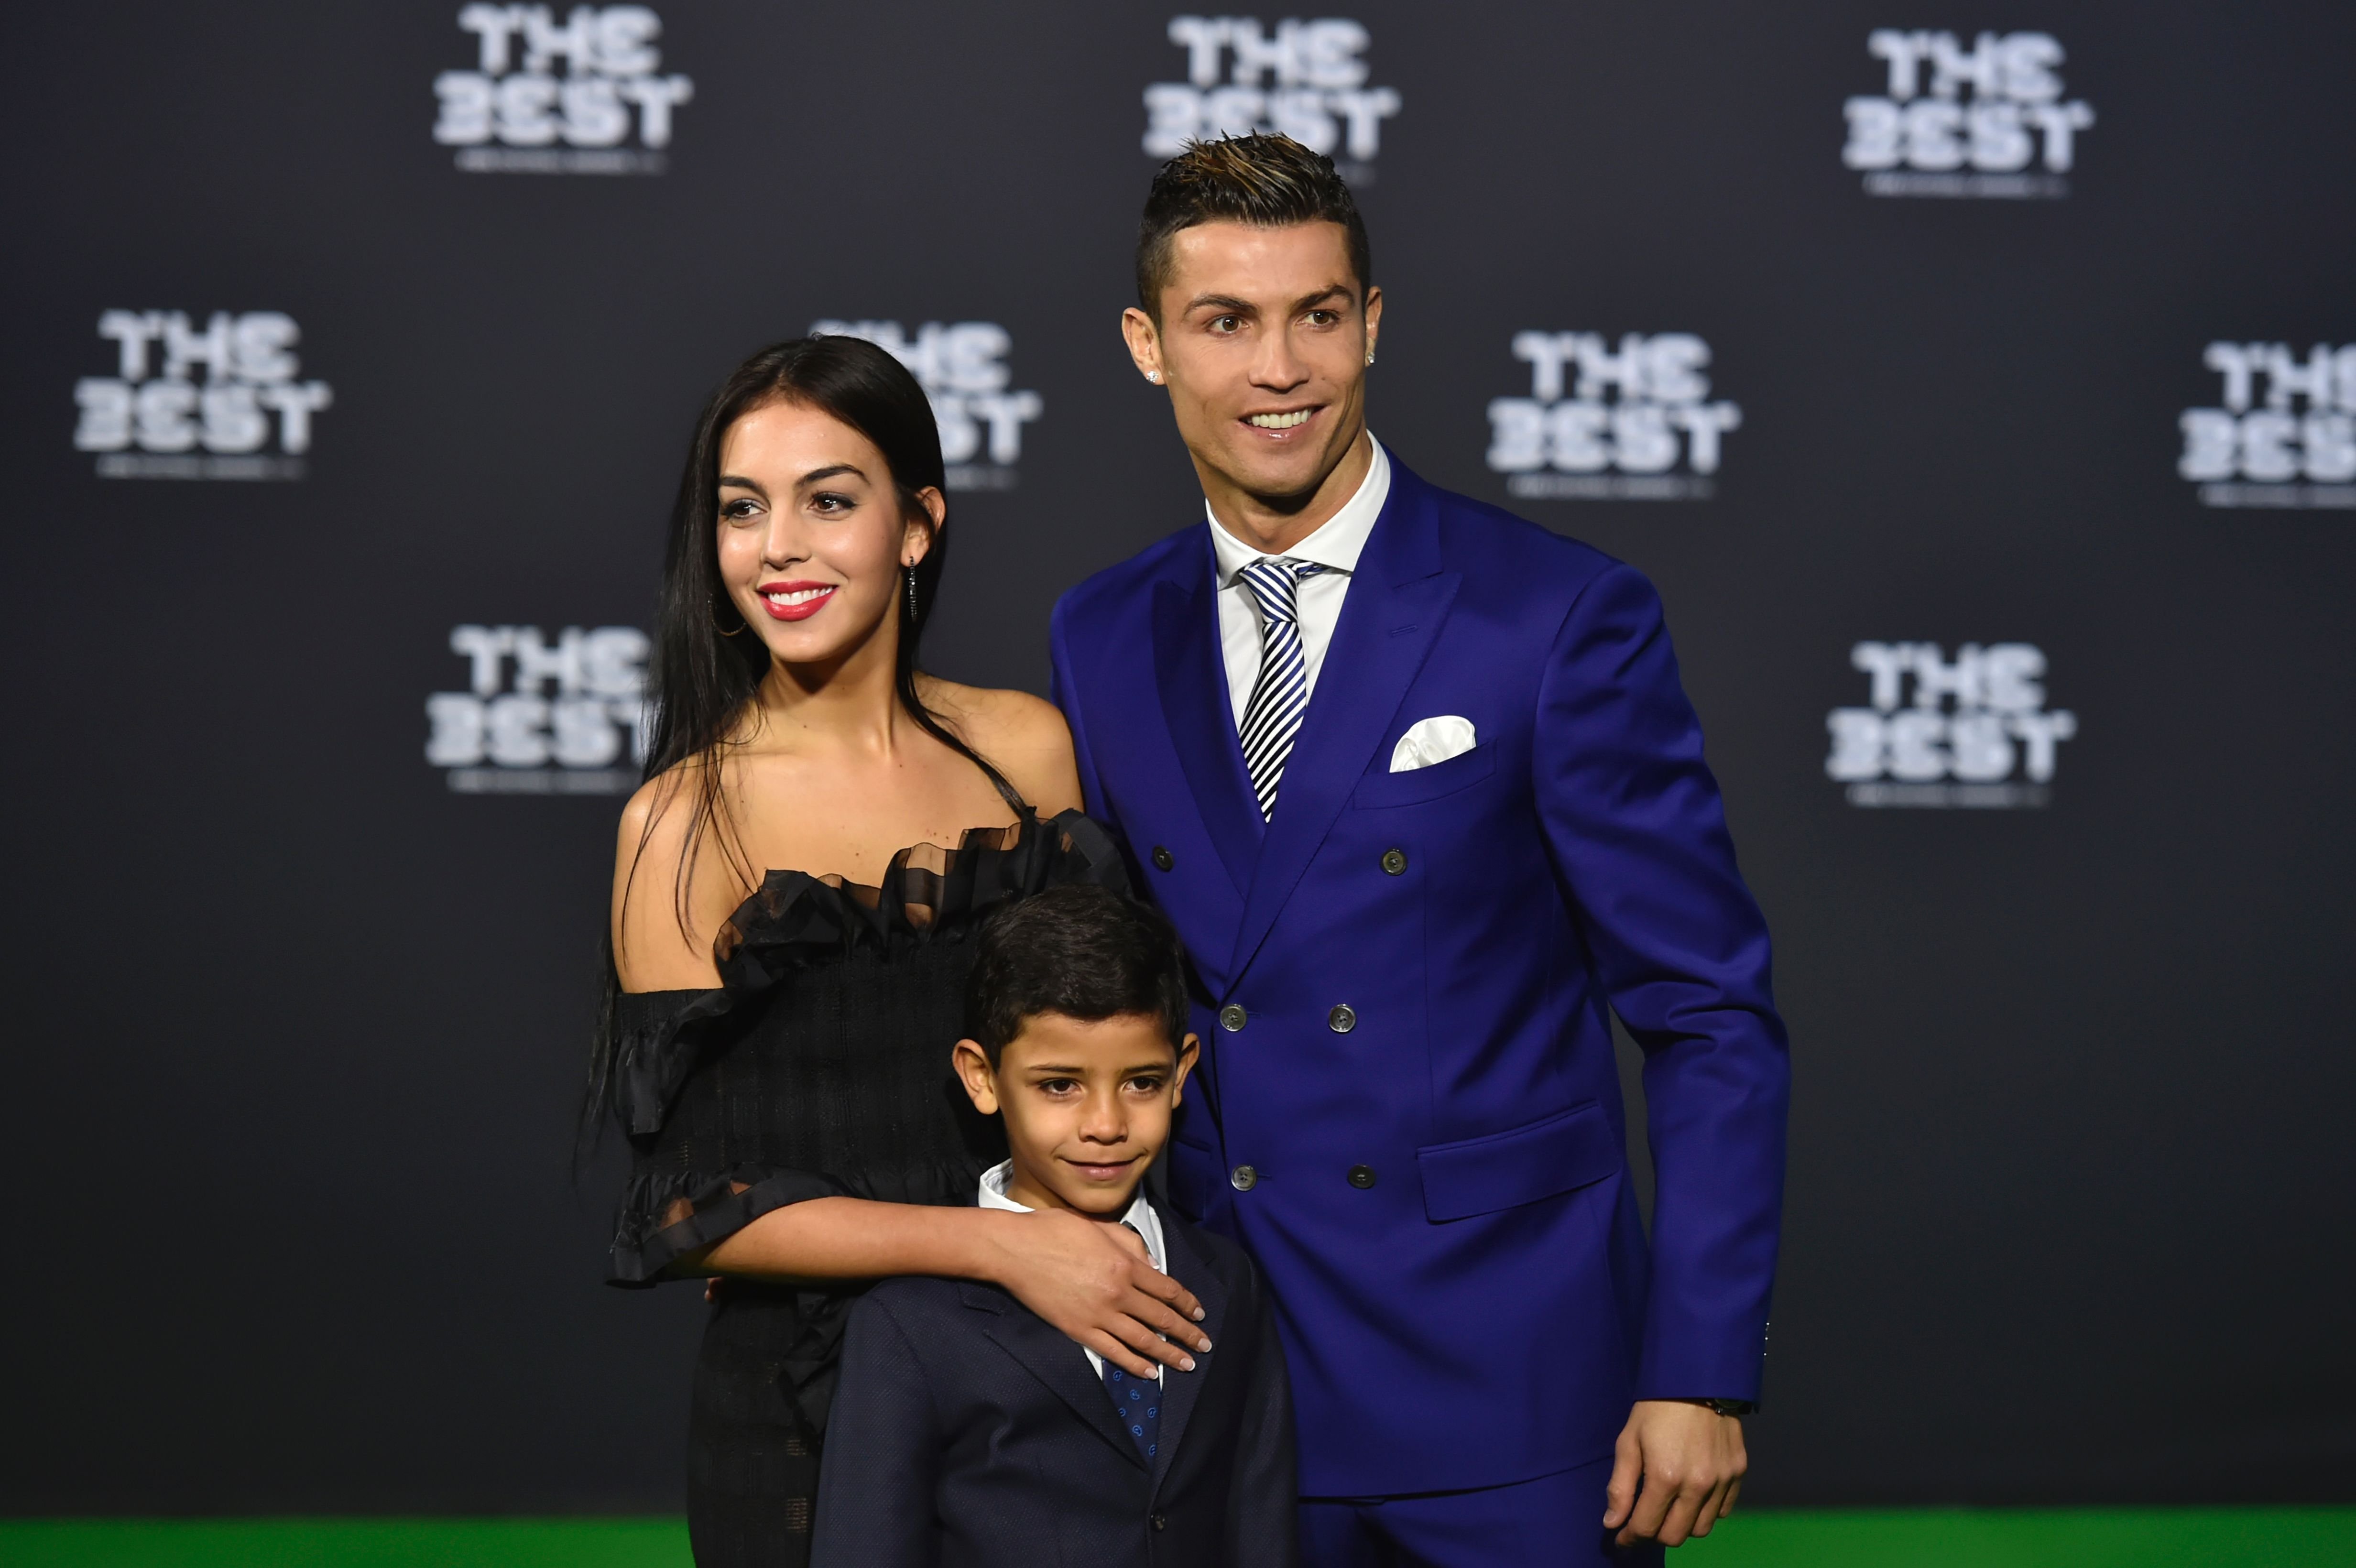 Cristiano Ronaldo poses with partner Georgina Rodriguez and his son Cristiano Ronaldo Jr at The Best FIFA Football Awards 2016 ceremony, on January 9, 2017 in Zurich | Source: Getty Images